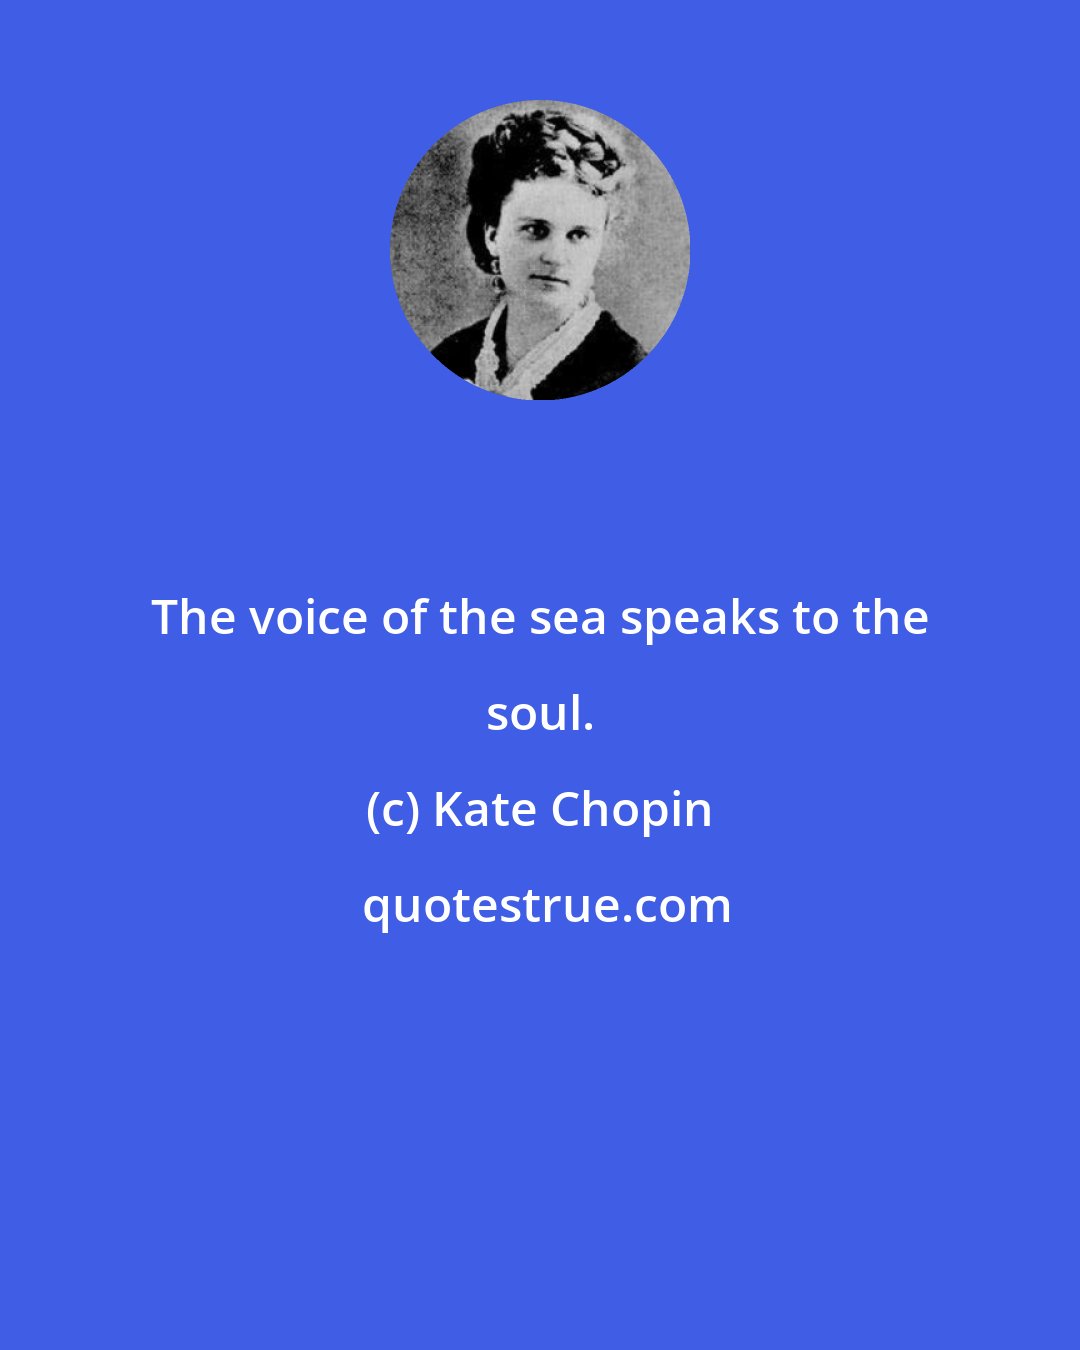 Kate Chopin: The voice of the sea speaks to the soul.